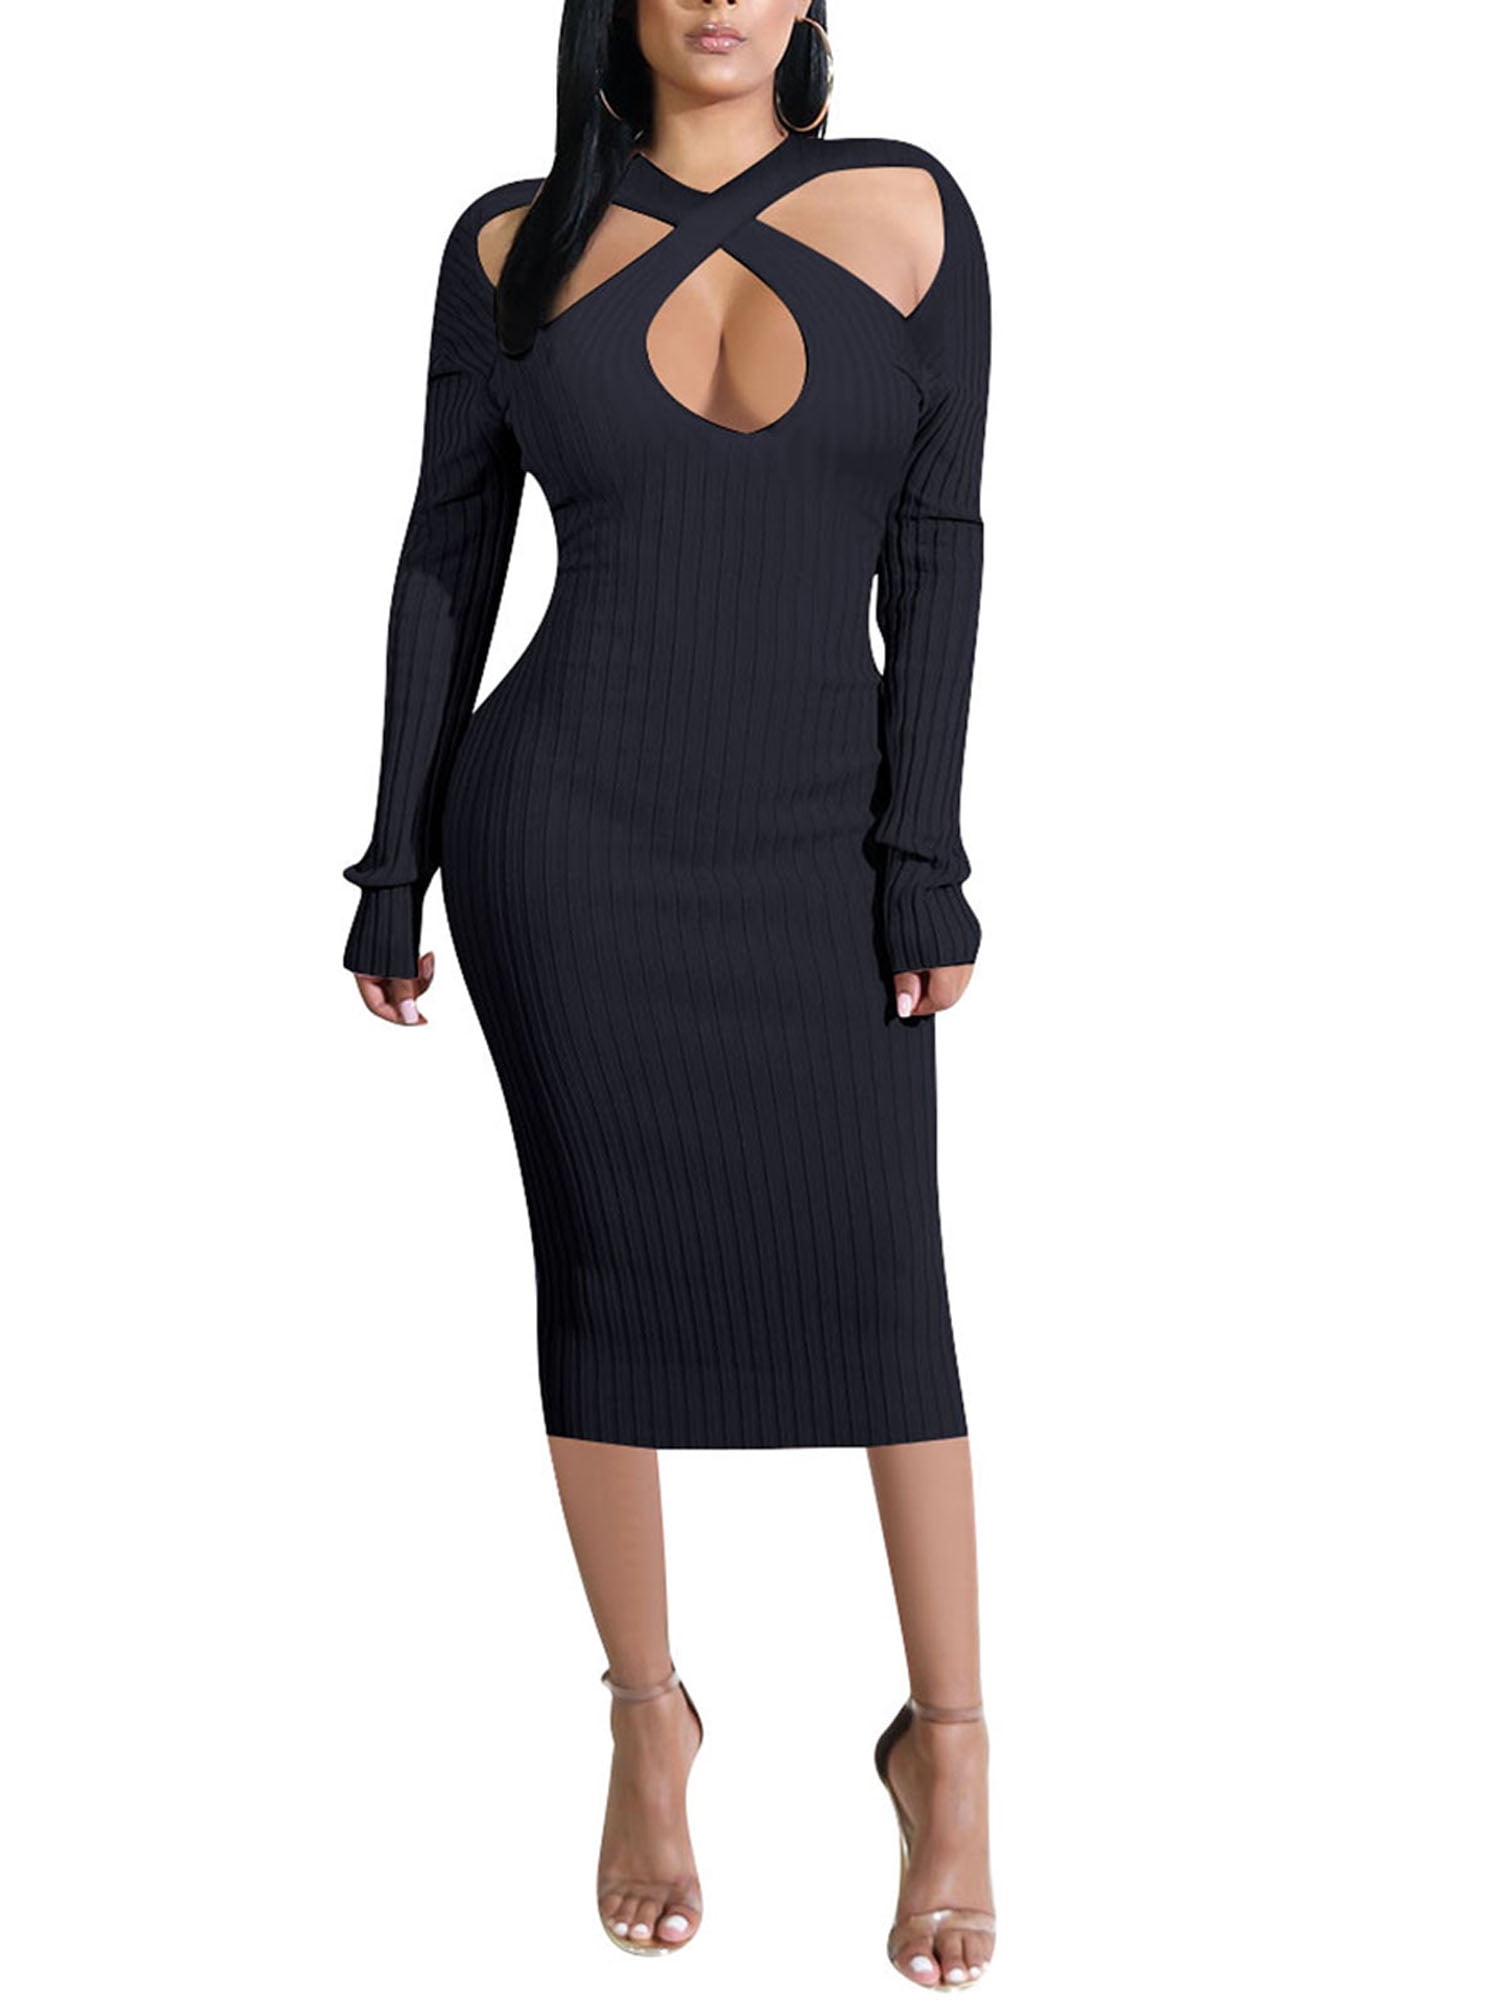 Ladies Ribbed Cut Out Shoulder Jumper Womens Plain Long Sleeve Bodycon Dress 